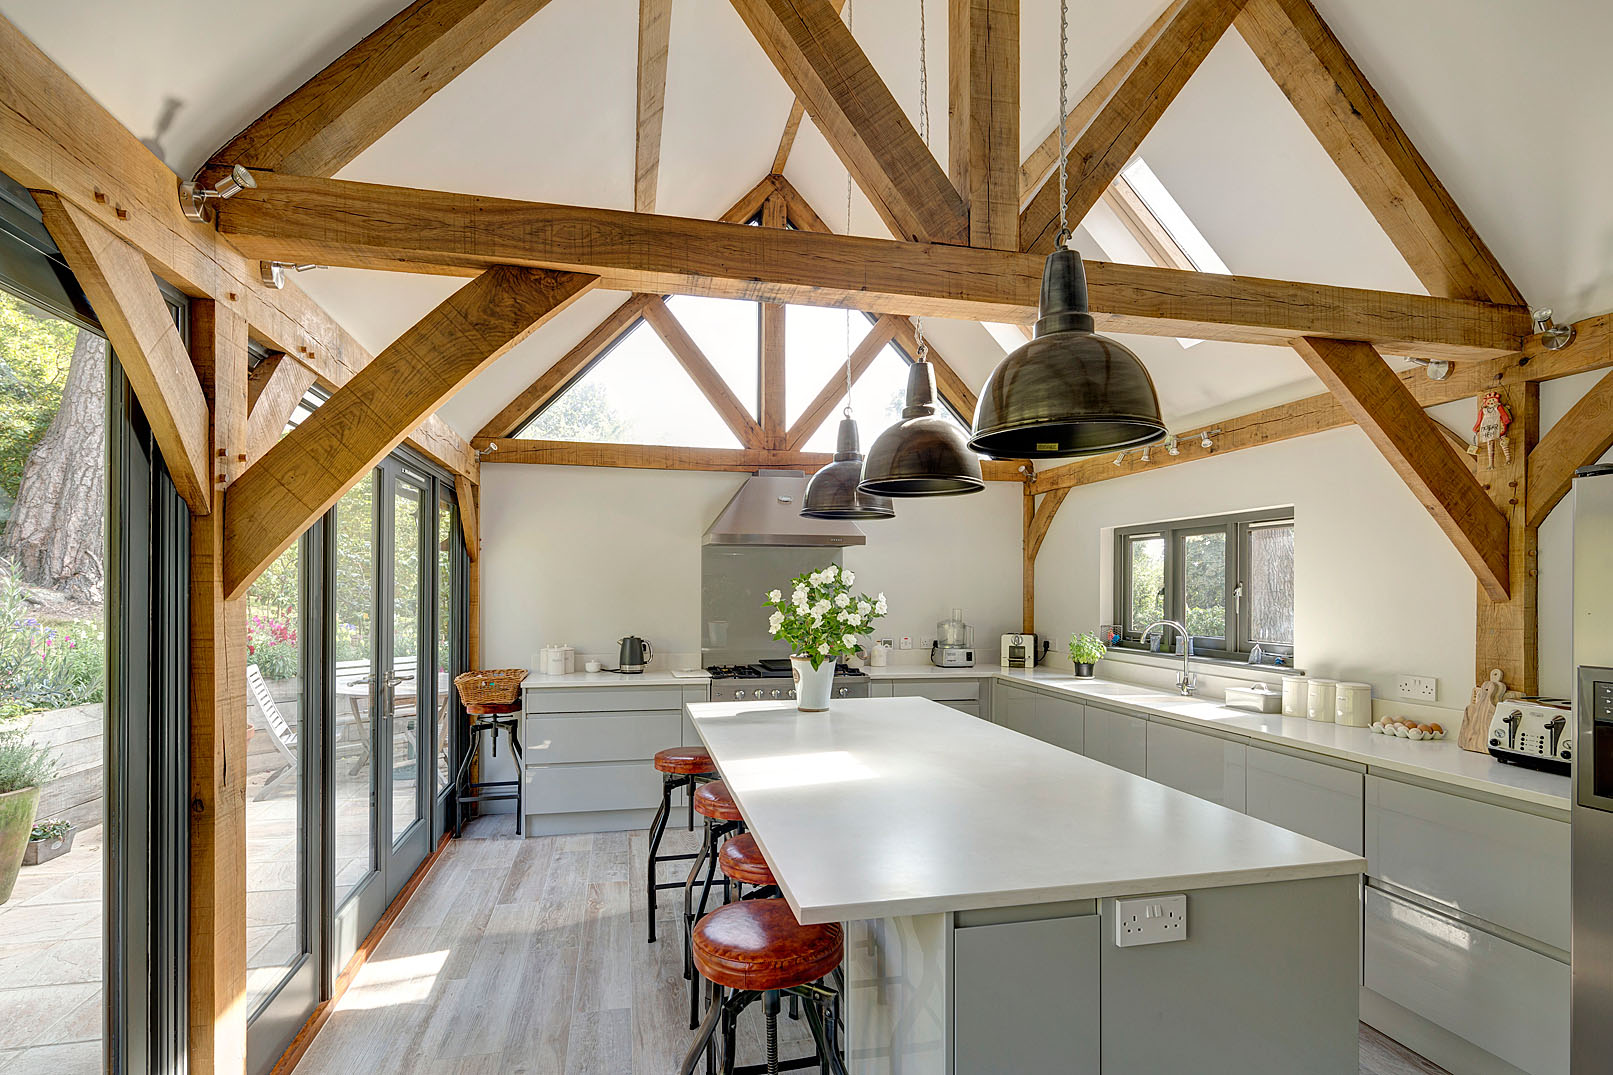 </p> <p>Find your ideal home design pro on designfor-me.com - get matched and see who's interested in your home project. Click image to see more inspiration from our design pros</p> <p>Design by Daniel, architectural designer from Tunbridge Wells, South East</p> <p>#architecture #homedesign #modernhomes #homeinspiration #kitchens #kitchendesign #kitcheninspiration #kitchenideas #kitchengoals #bifolddoors #bifolds #barnconversions </p> <p>